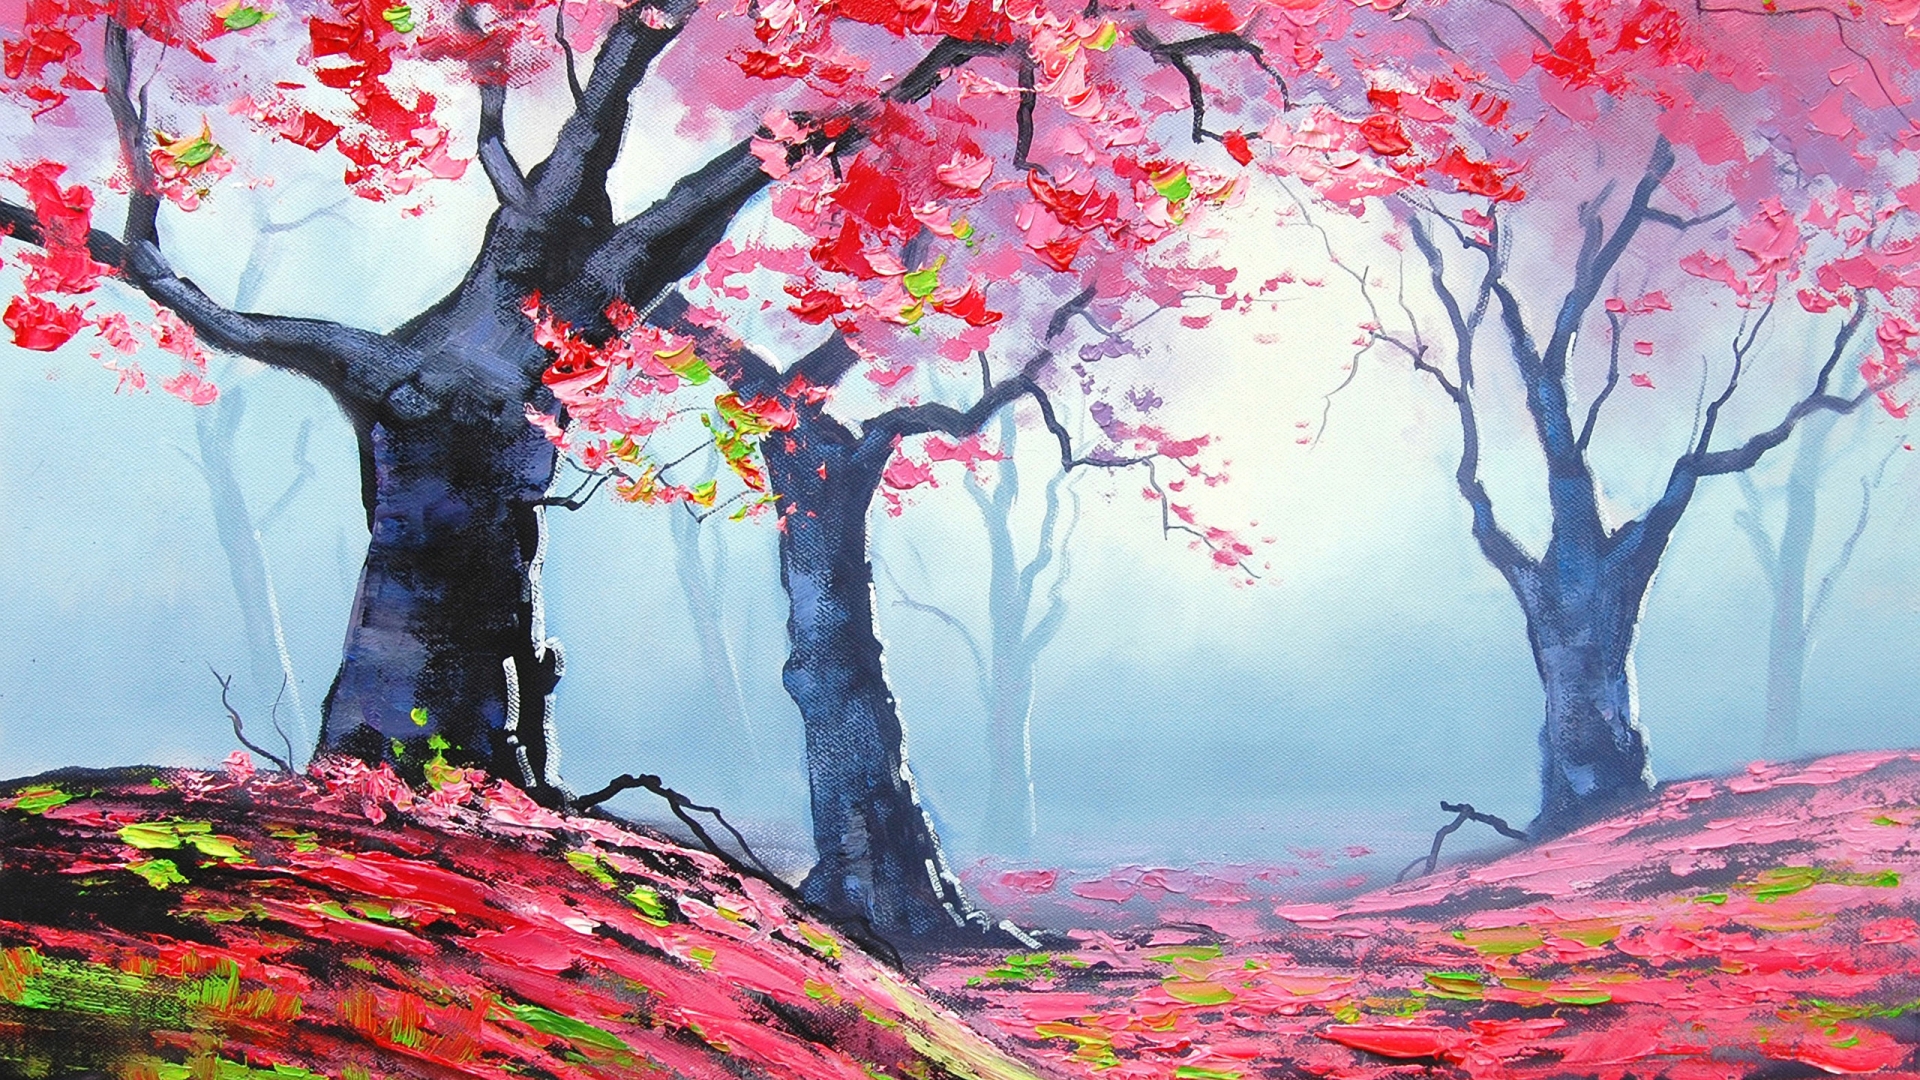 Autumn Red Forest Painting for 1920 x 1080 HDTV 1080p resolution